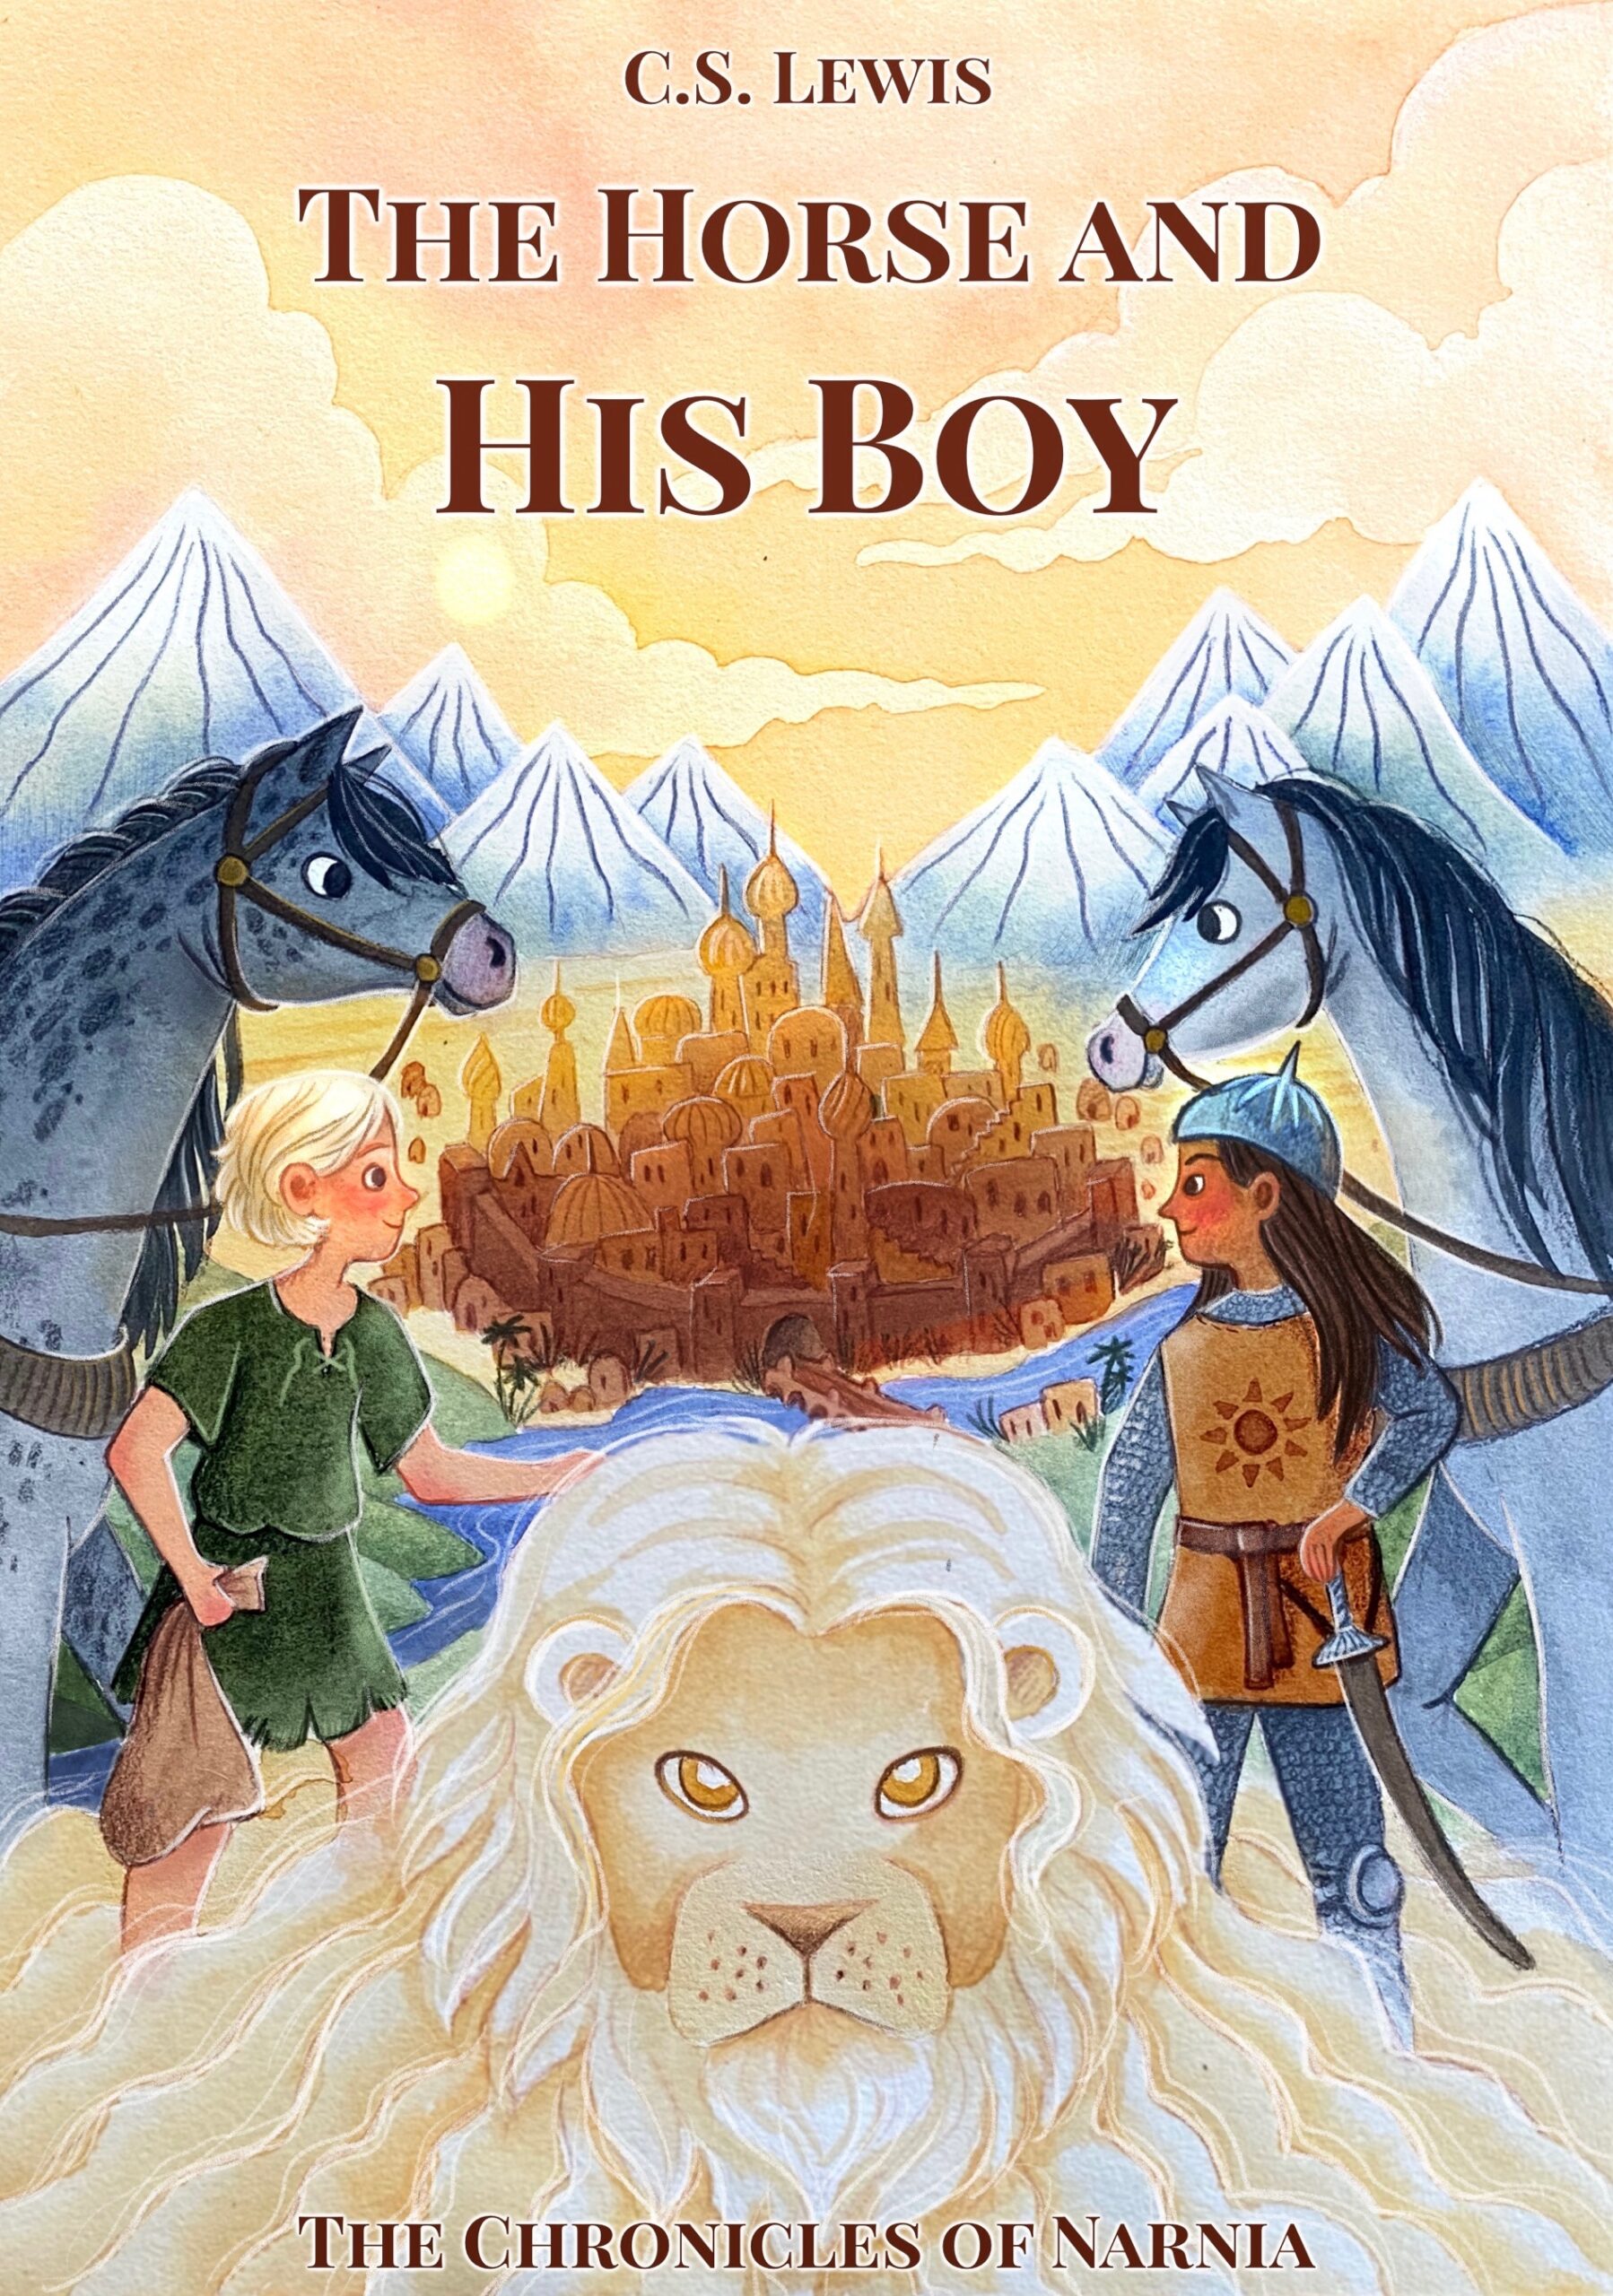 Cover design for The Horse and His Boy from the Chronicles of Narnia series. There are mountains and a pale orange sky in the background, the city of Tashban in the mid ground with a river in front of it. On either side of the design is a horse, with a boy standing next to one, and a girl in armor standing next to the other, facing each other. A lion's head is pictured in the bottom of the image.